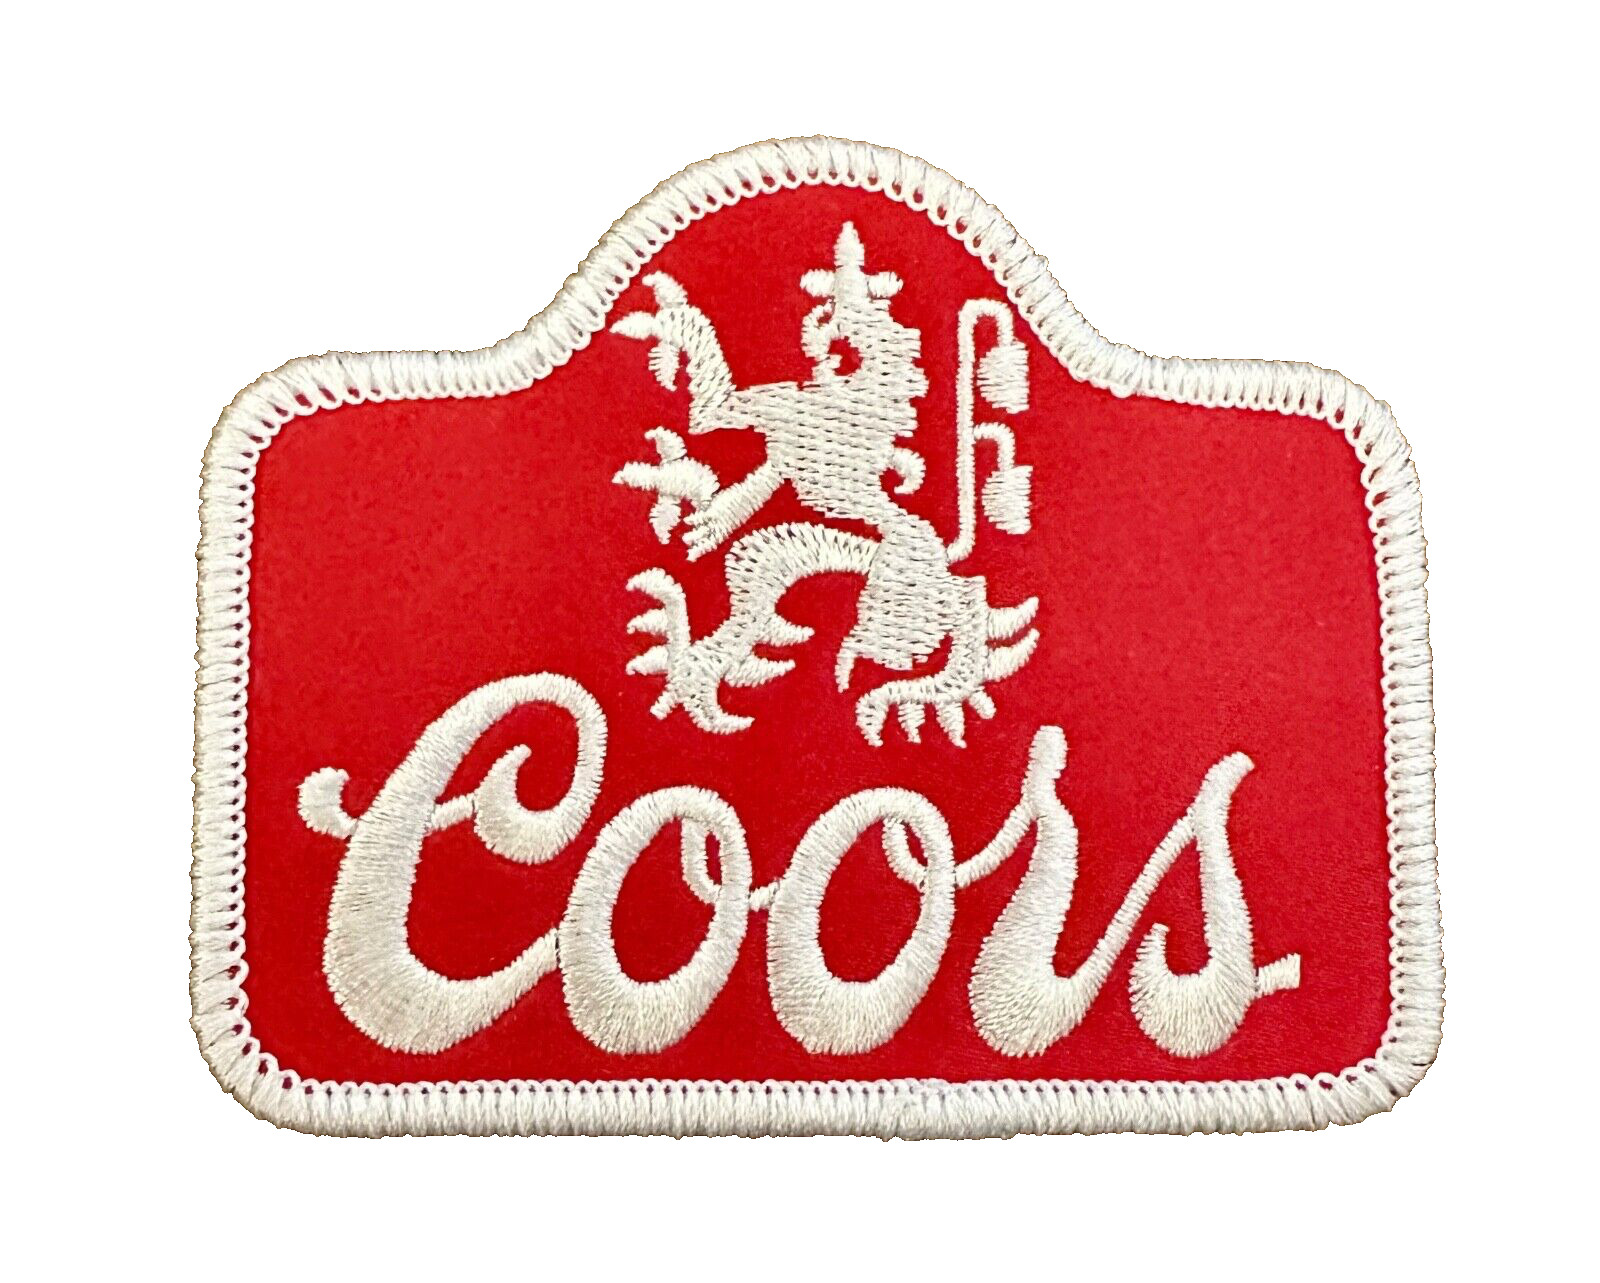 FABULOUS VINTAGE STYLE COORS BEER EMBROIDERED IRON-ON PATCH...